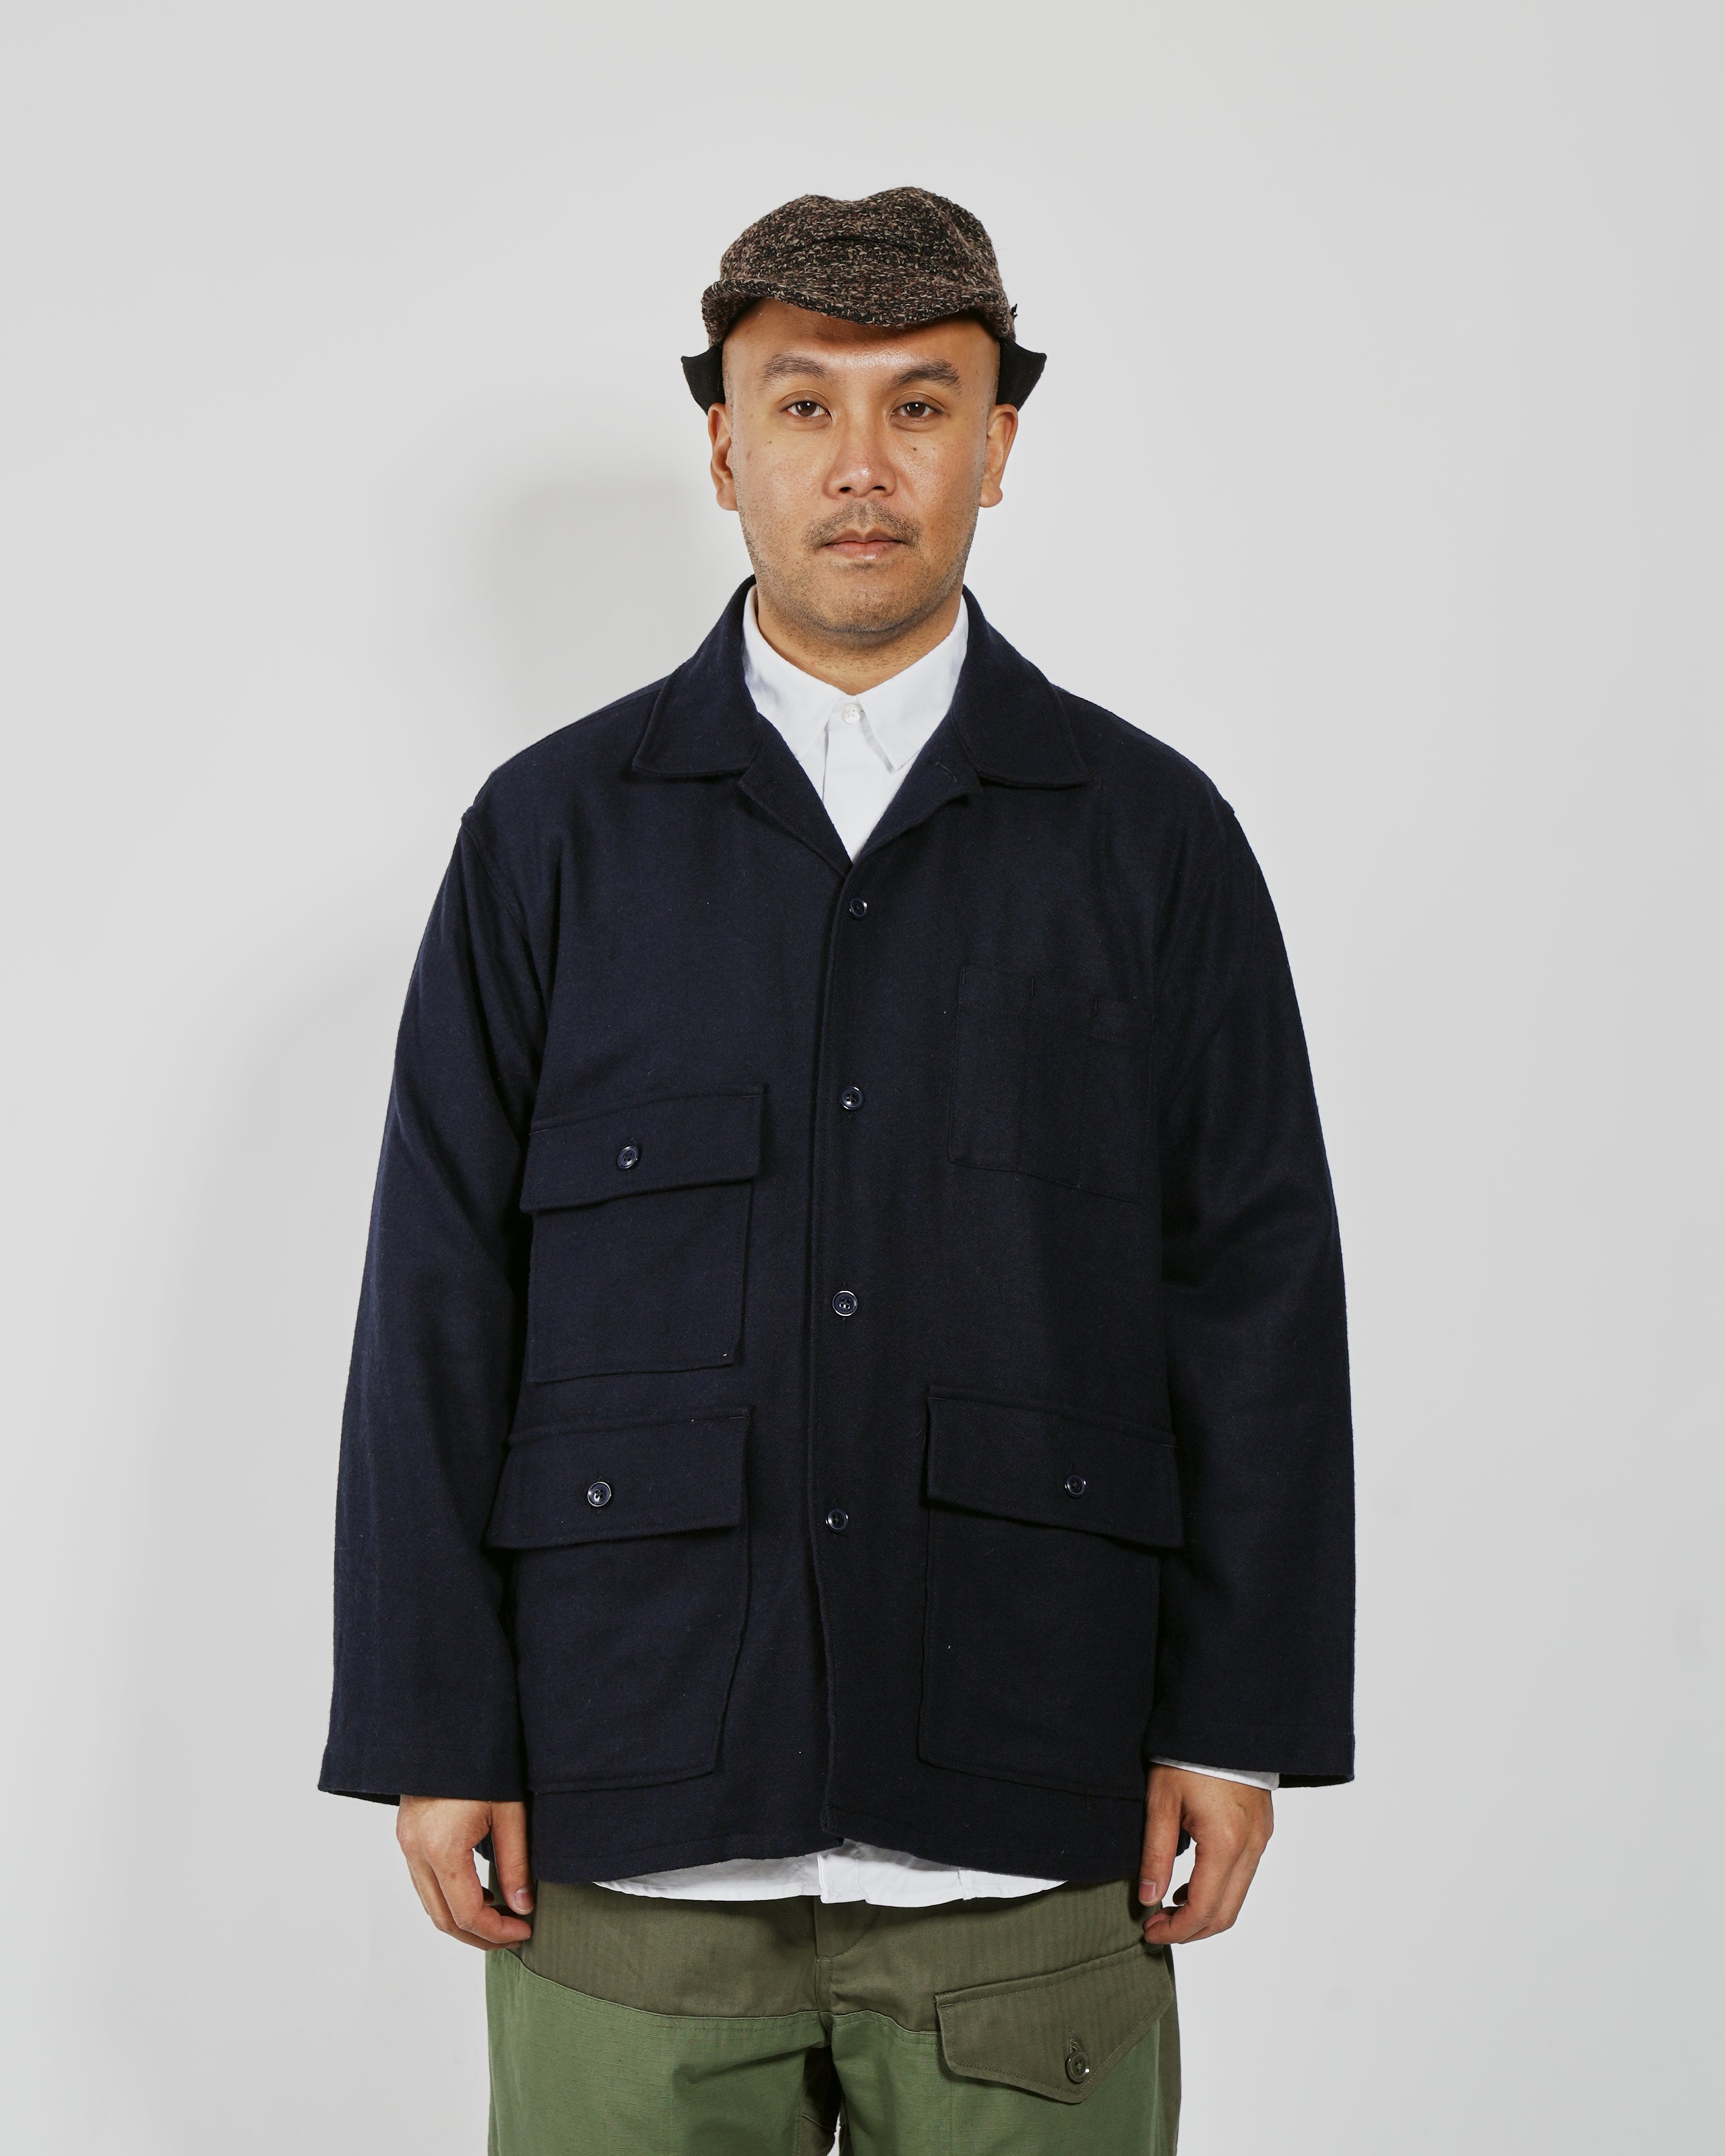 BA Shirt Jacket - Navy Solid Poly Wool Flannel